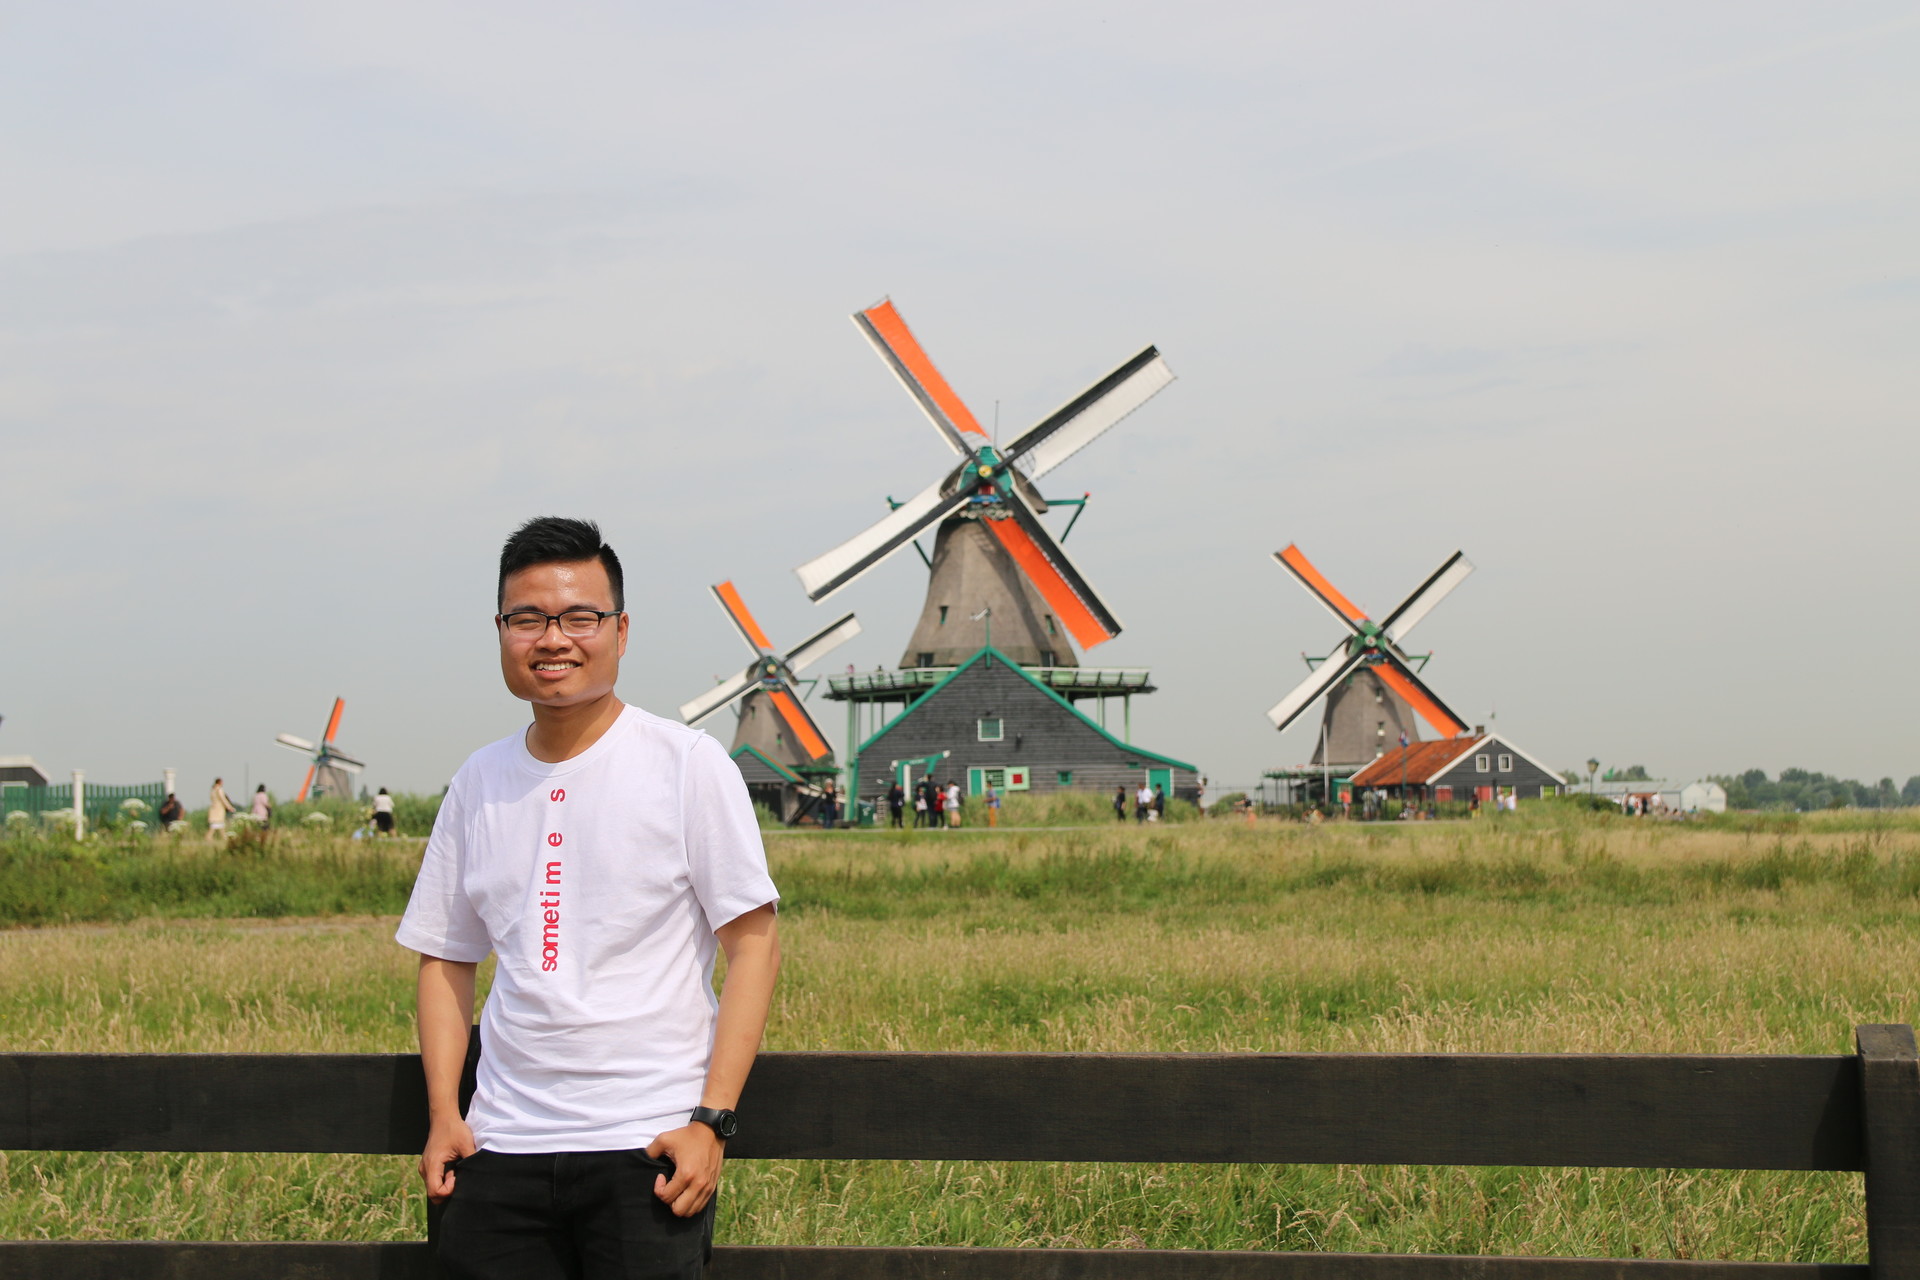 amsterdam-_-my-great-experience-amsterda